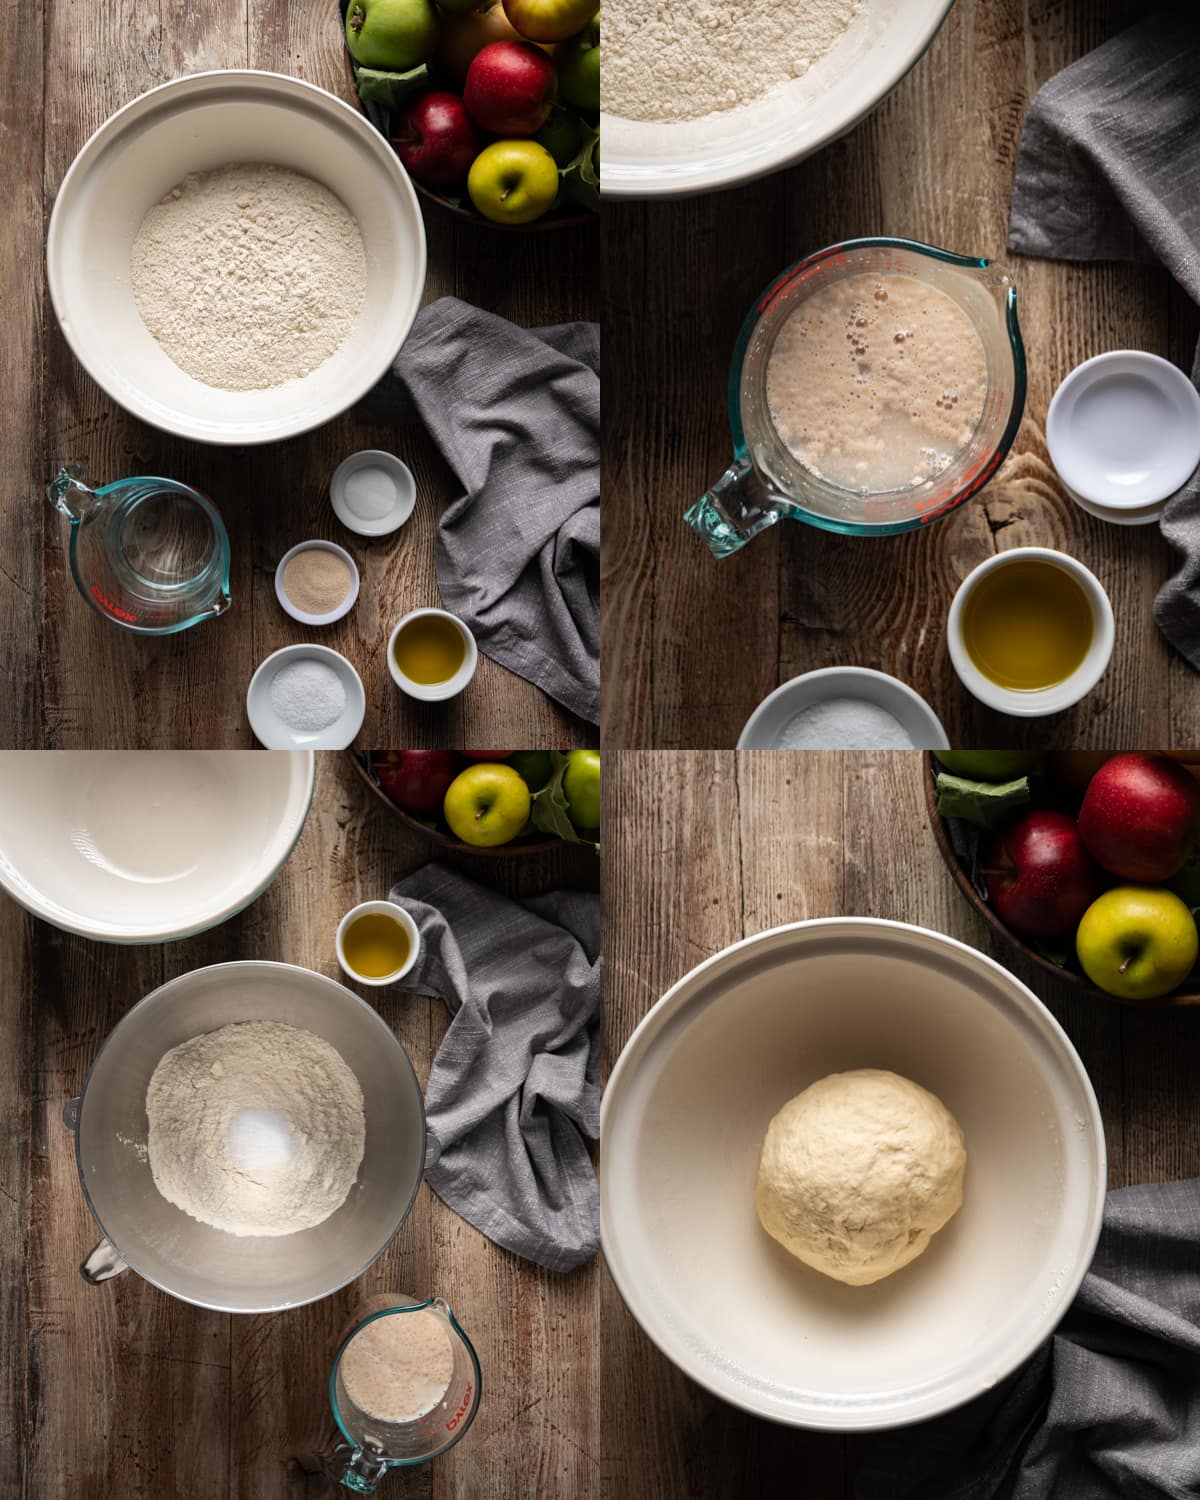 yeast dough process with flour in bowl and yeast mixture in cup